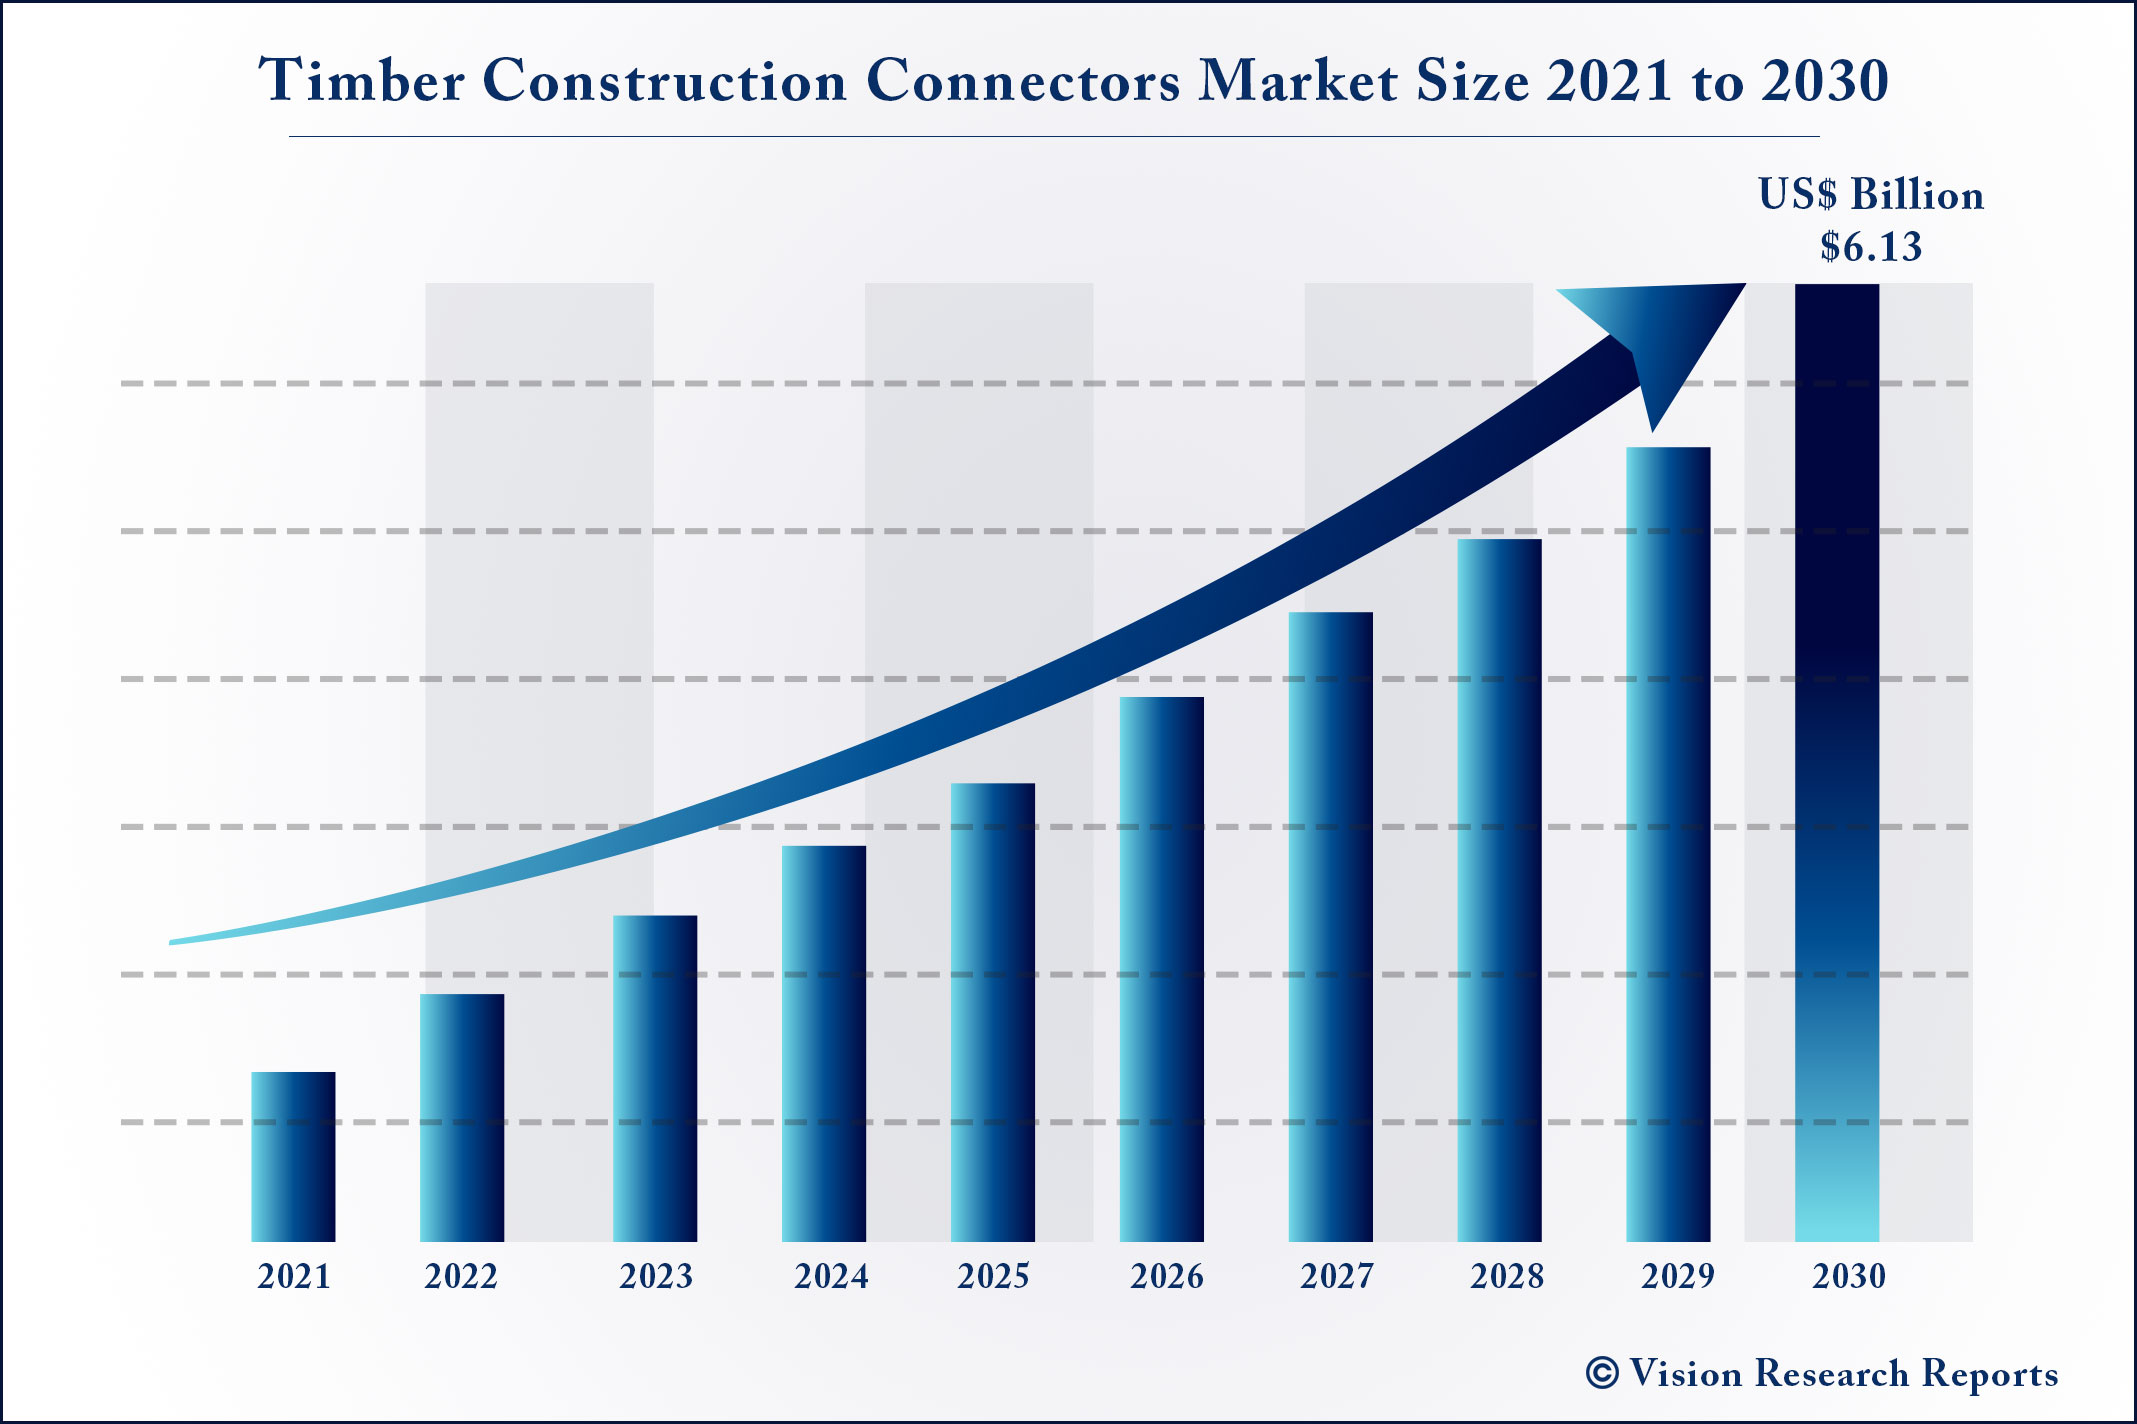 Timber Construction Connectors Market Size 2021 to 2030